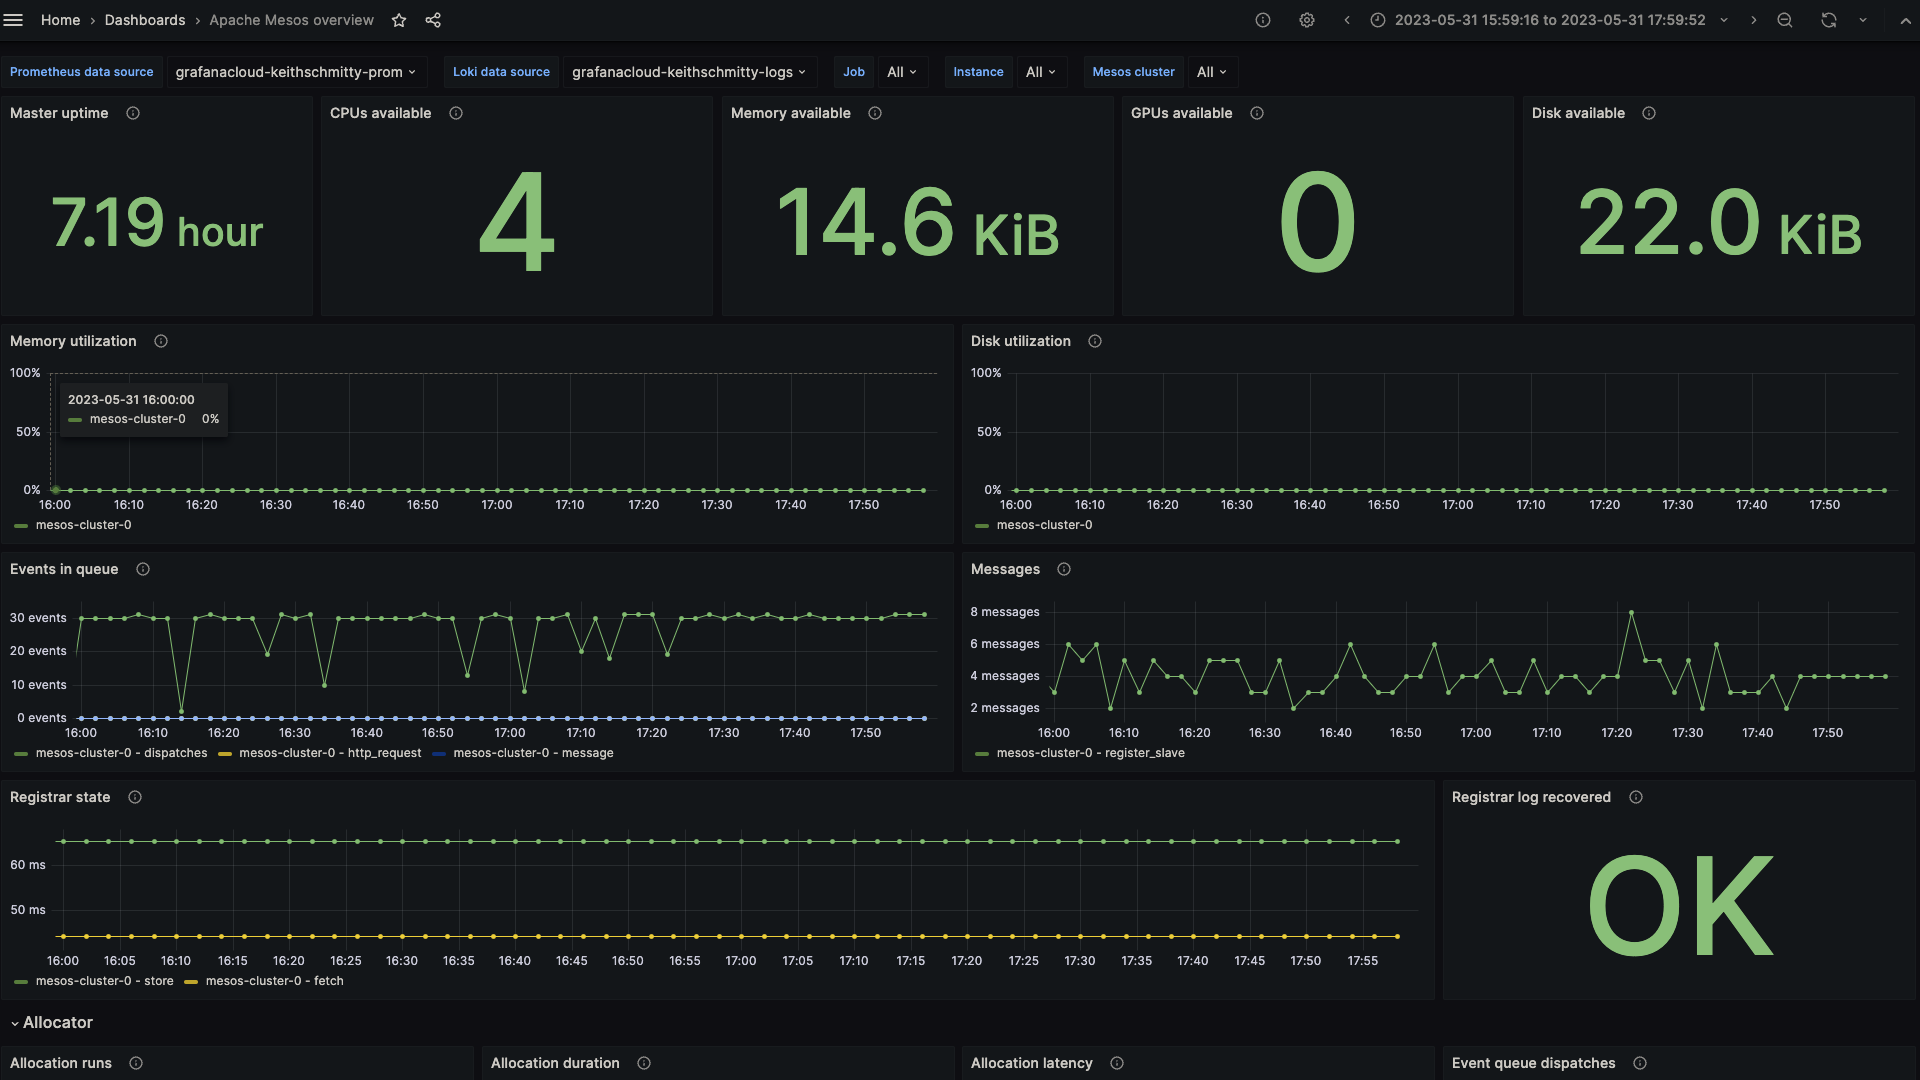 Apache Mesos overview dashboard part 1